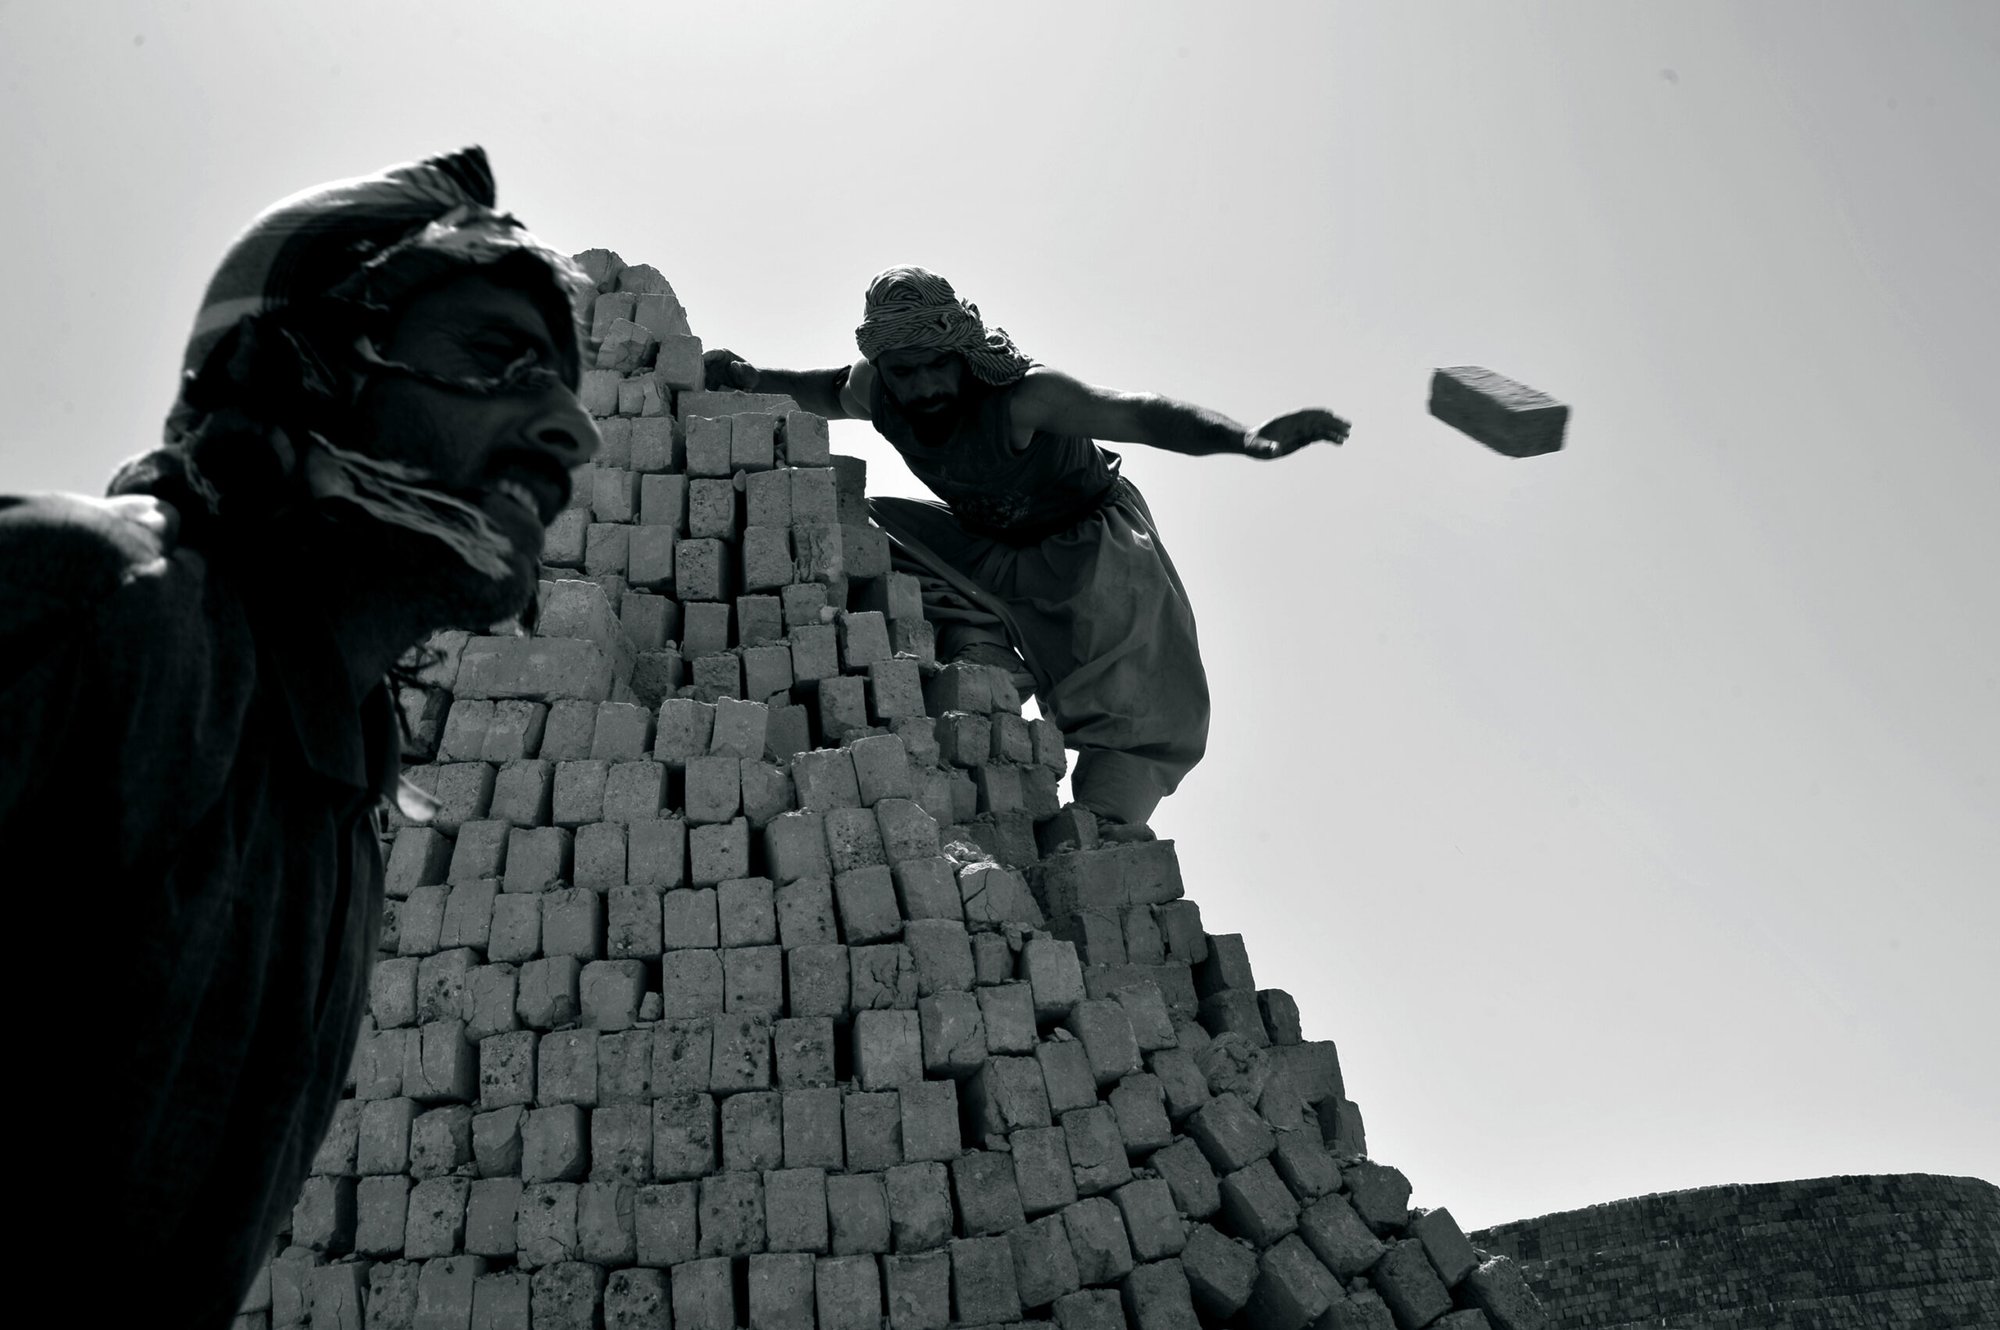 Afghan workers in brick workshops, often illegal migrants, are deprived of basic rights. 